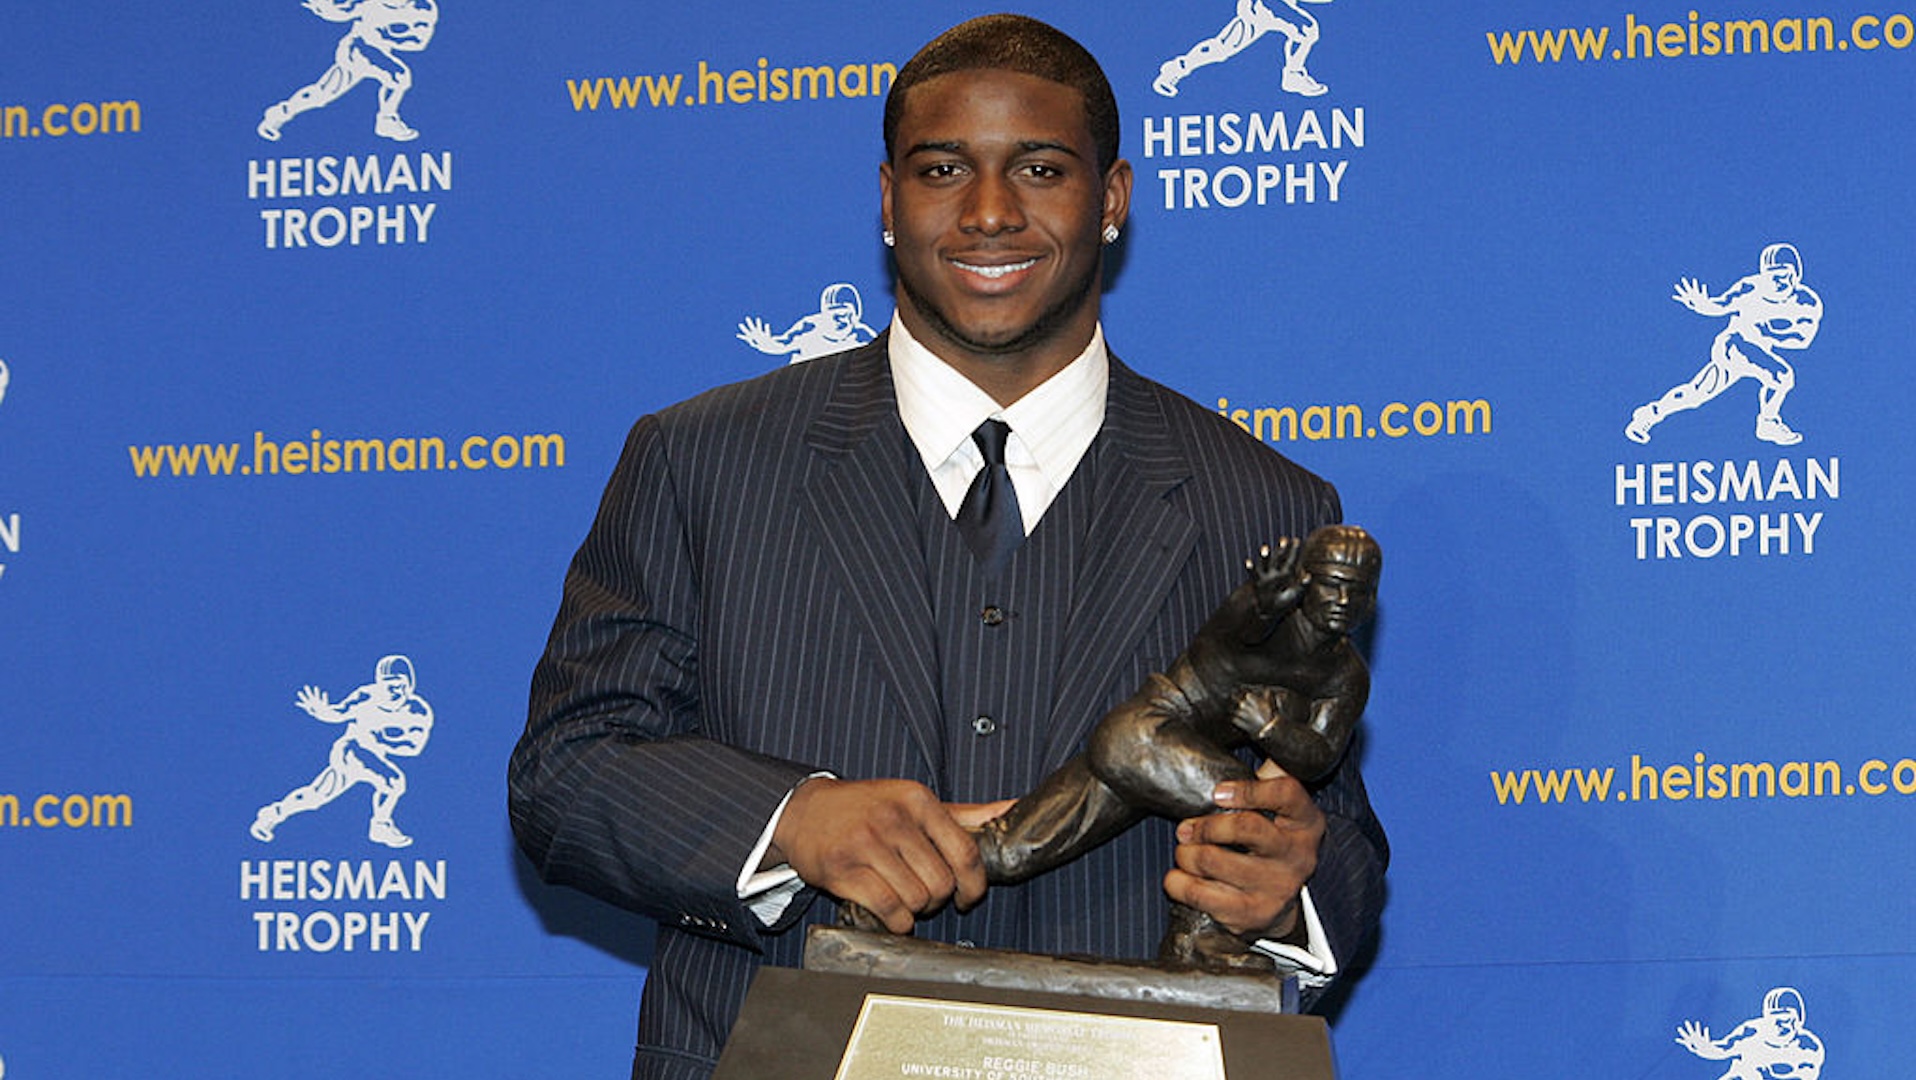 Reggie Bush, University of Southern California tailback holds the Heisman Trophy during the 2005 Heisman Trophy presentation at the Hard Rock Cafe in New York City, New York on December 10, 2005.